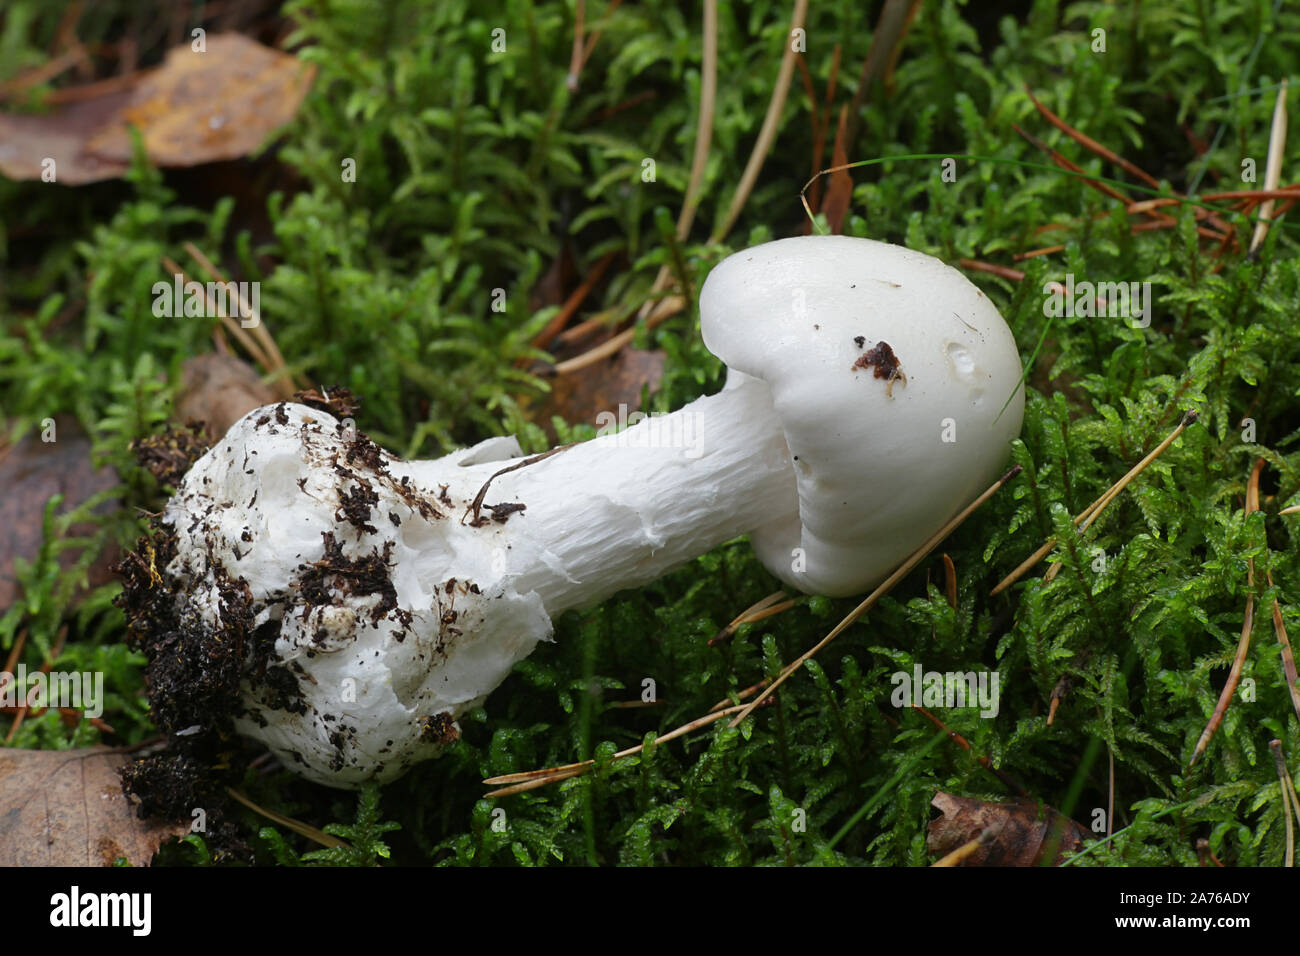 Amanita virosa, known in Europe as the destroying angel, a deadly poisonous mushroom from Finland Stock Photo